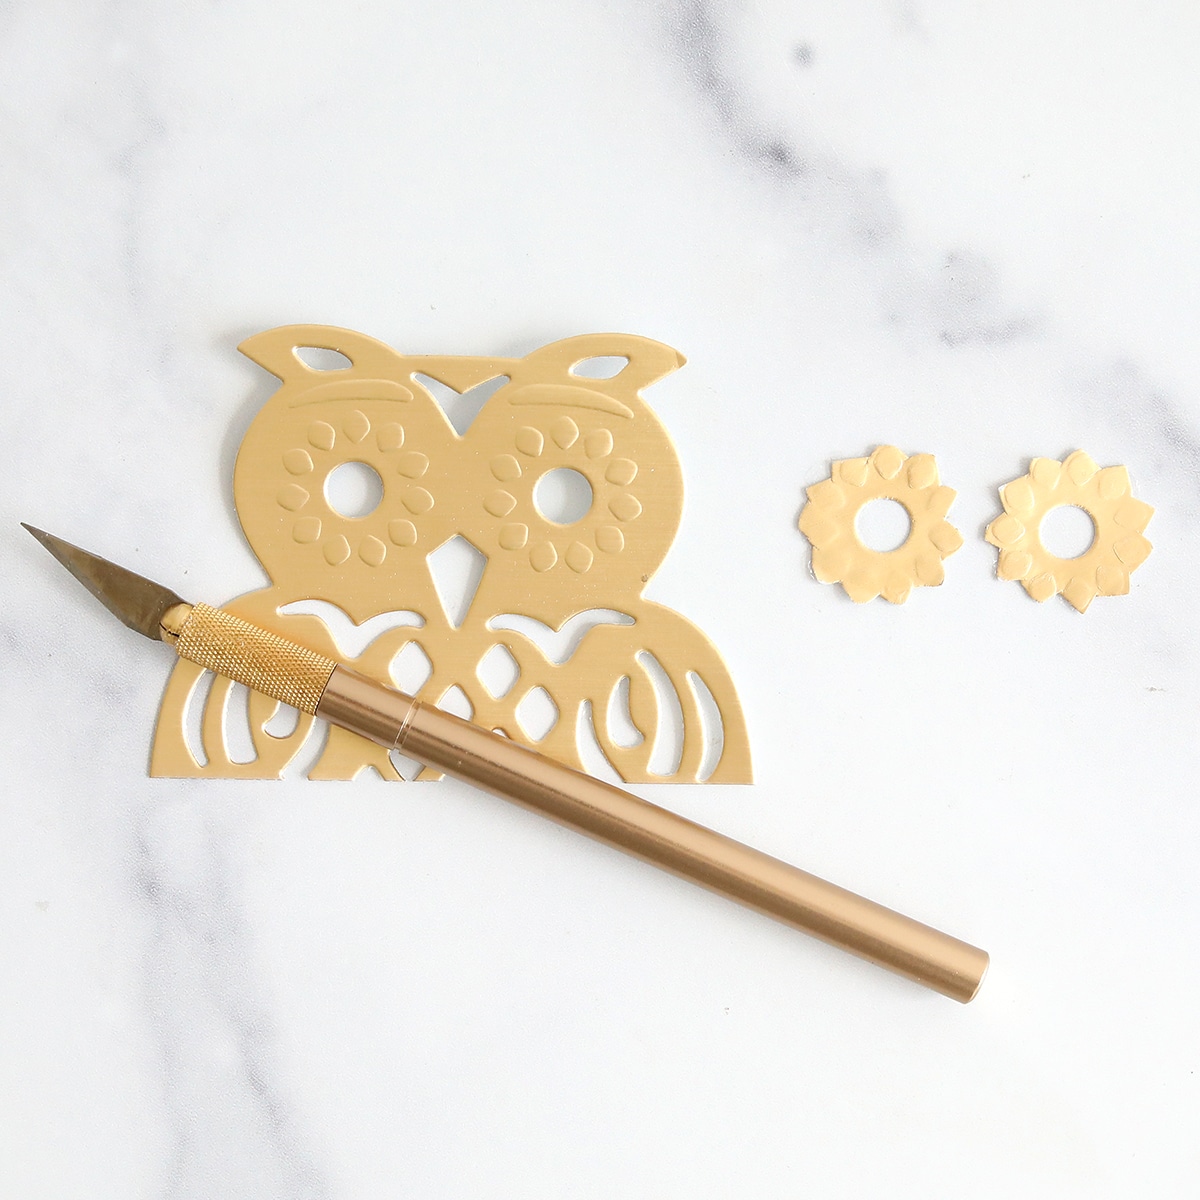 A gold owl and a pen on a marble table.